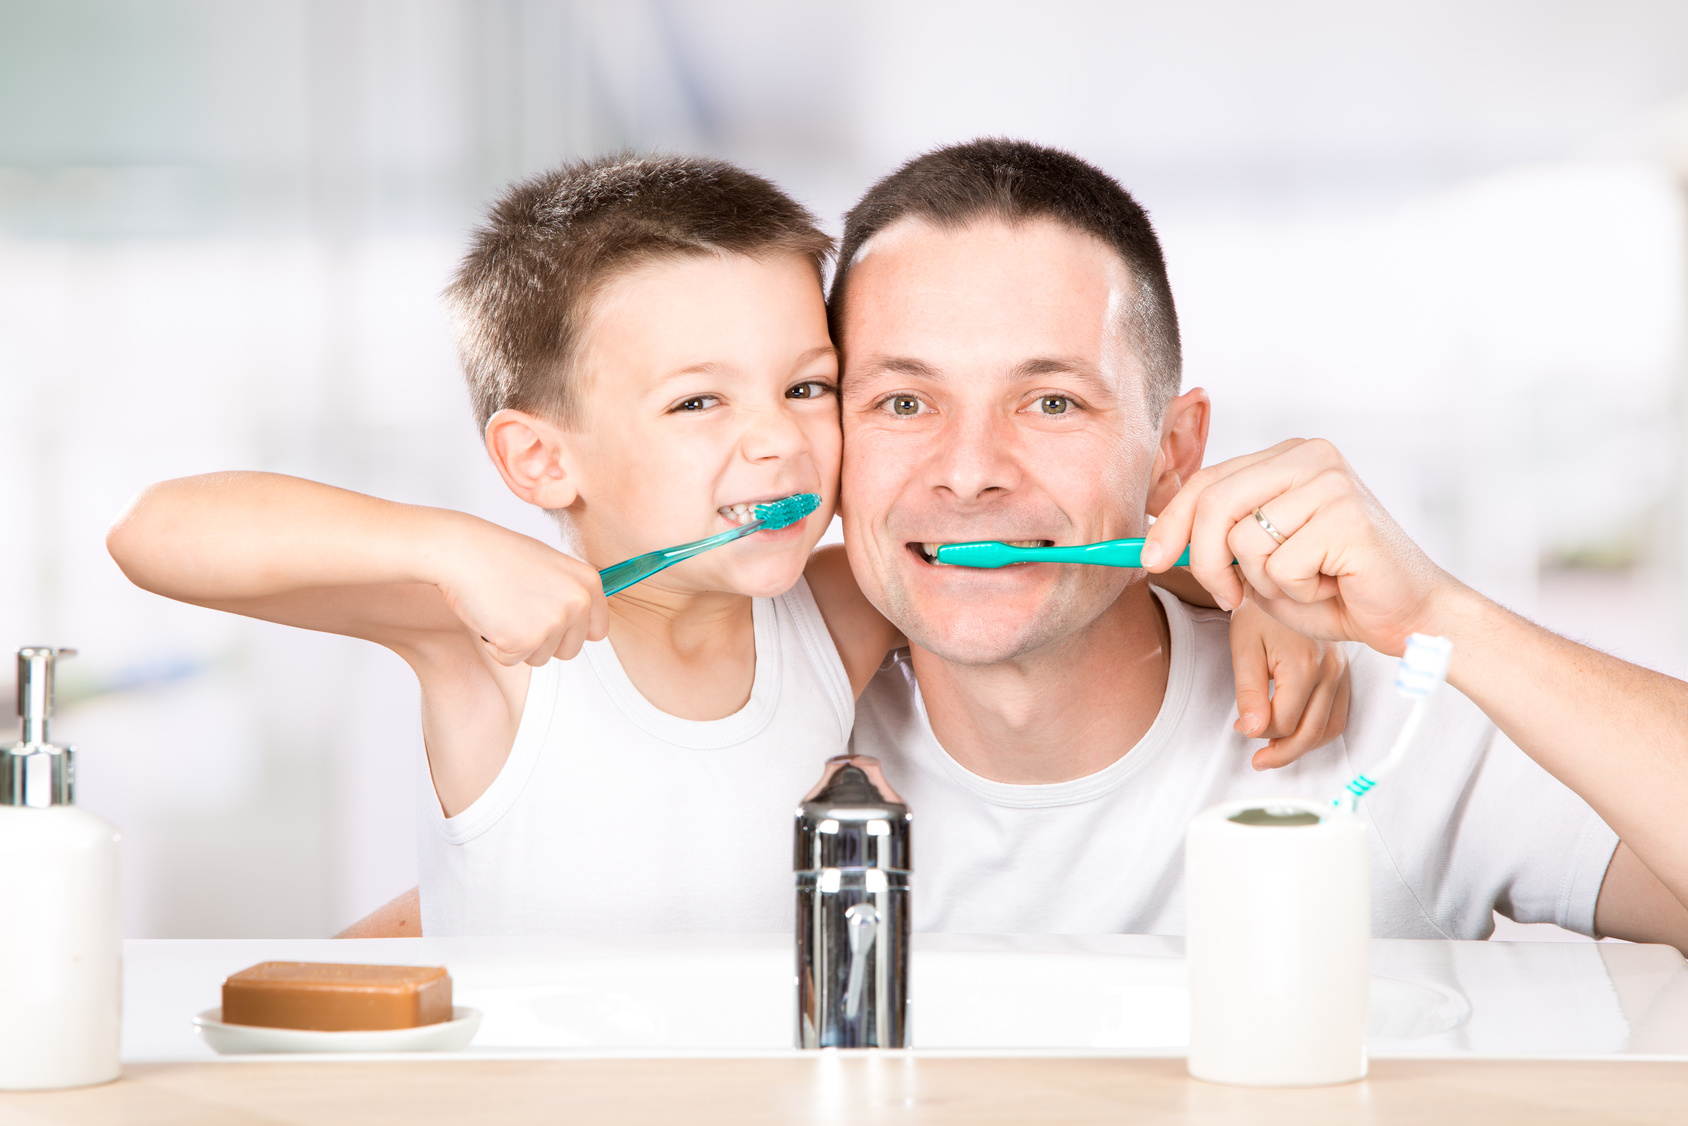 Preventing Future Oral Health Issues with Early Prevention